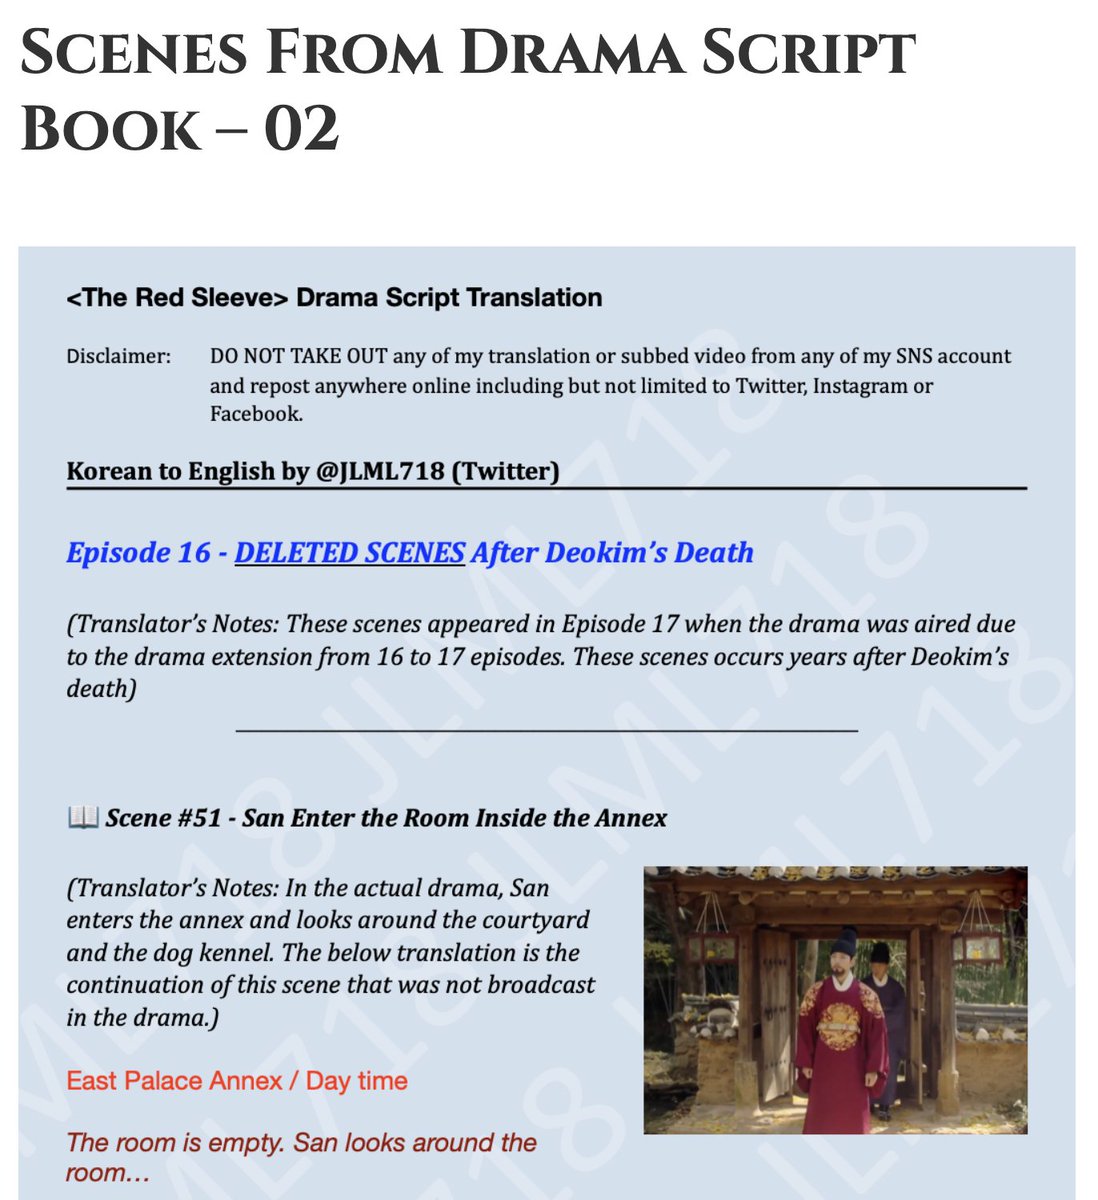 #TheRedSleeve #LeeJunho #Junho [ENG TRANS] Final Episode DELETED SCENES after Deokim's death not aired in the drama. To read the full translation, go to: unlocktheredsleeve.wordpress.com/scenes-from-dr…